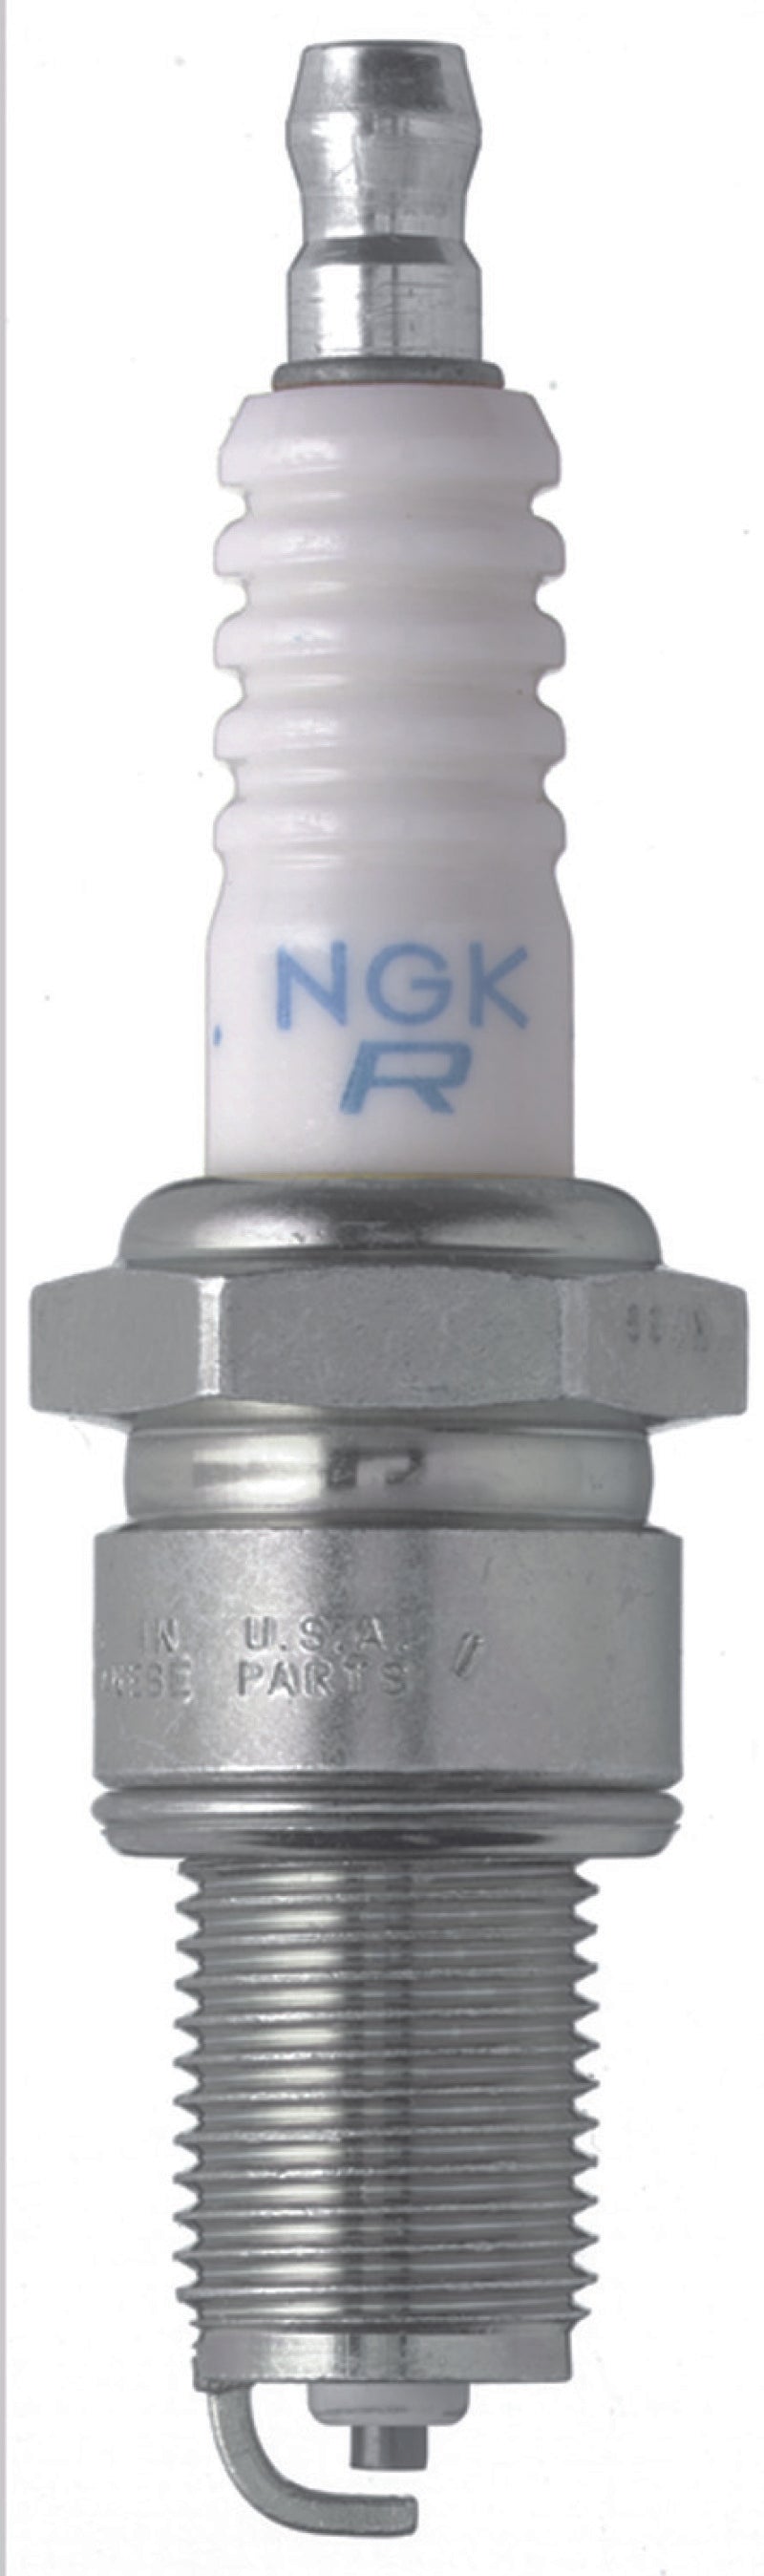 NGK Traditional Spark Plug Box of 4 (BPR6ES) -  Shop now at Performance Car Parts